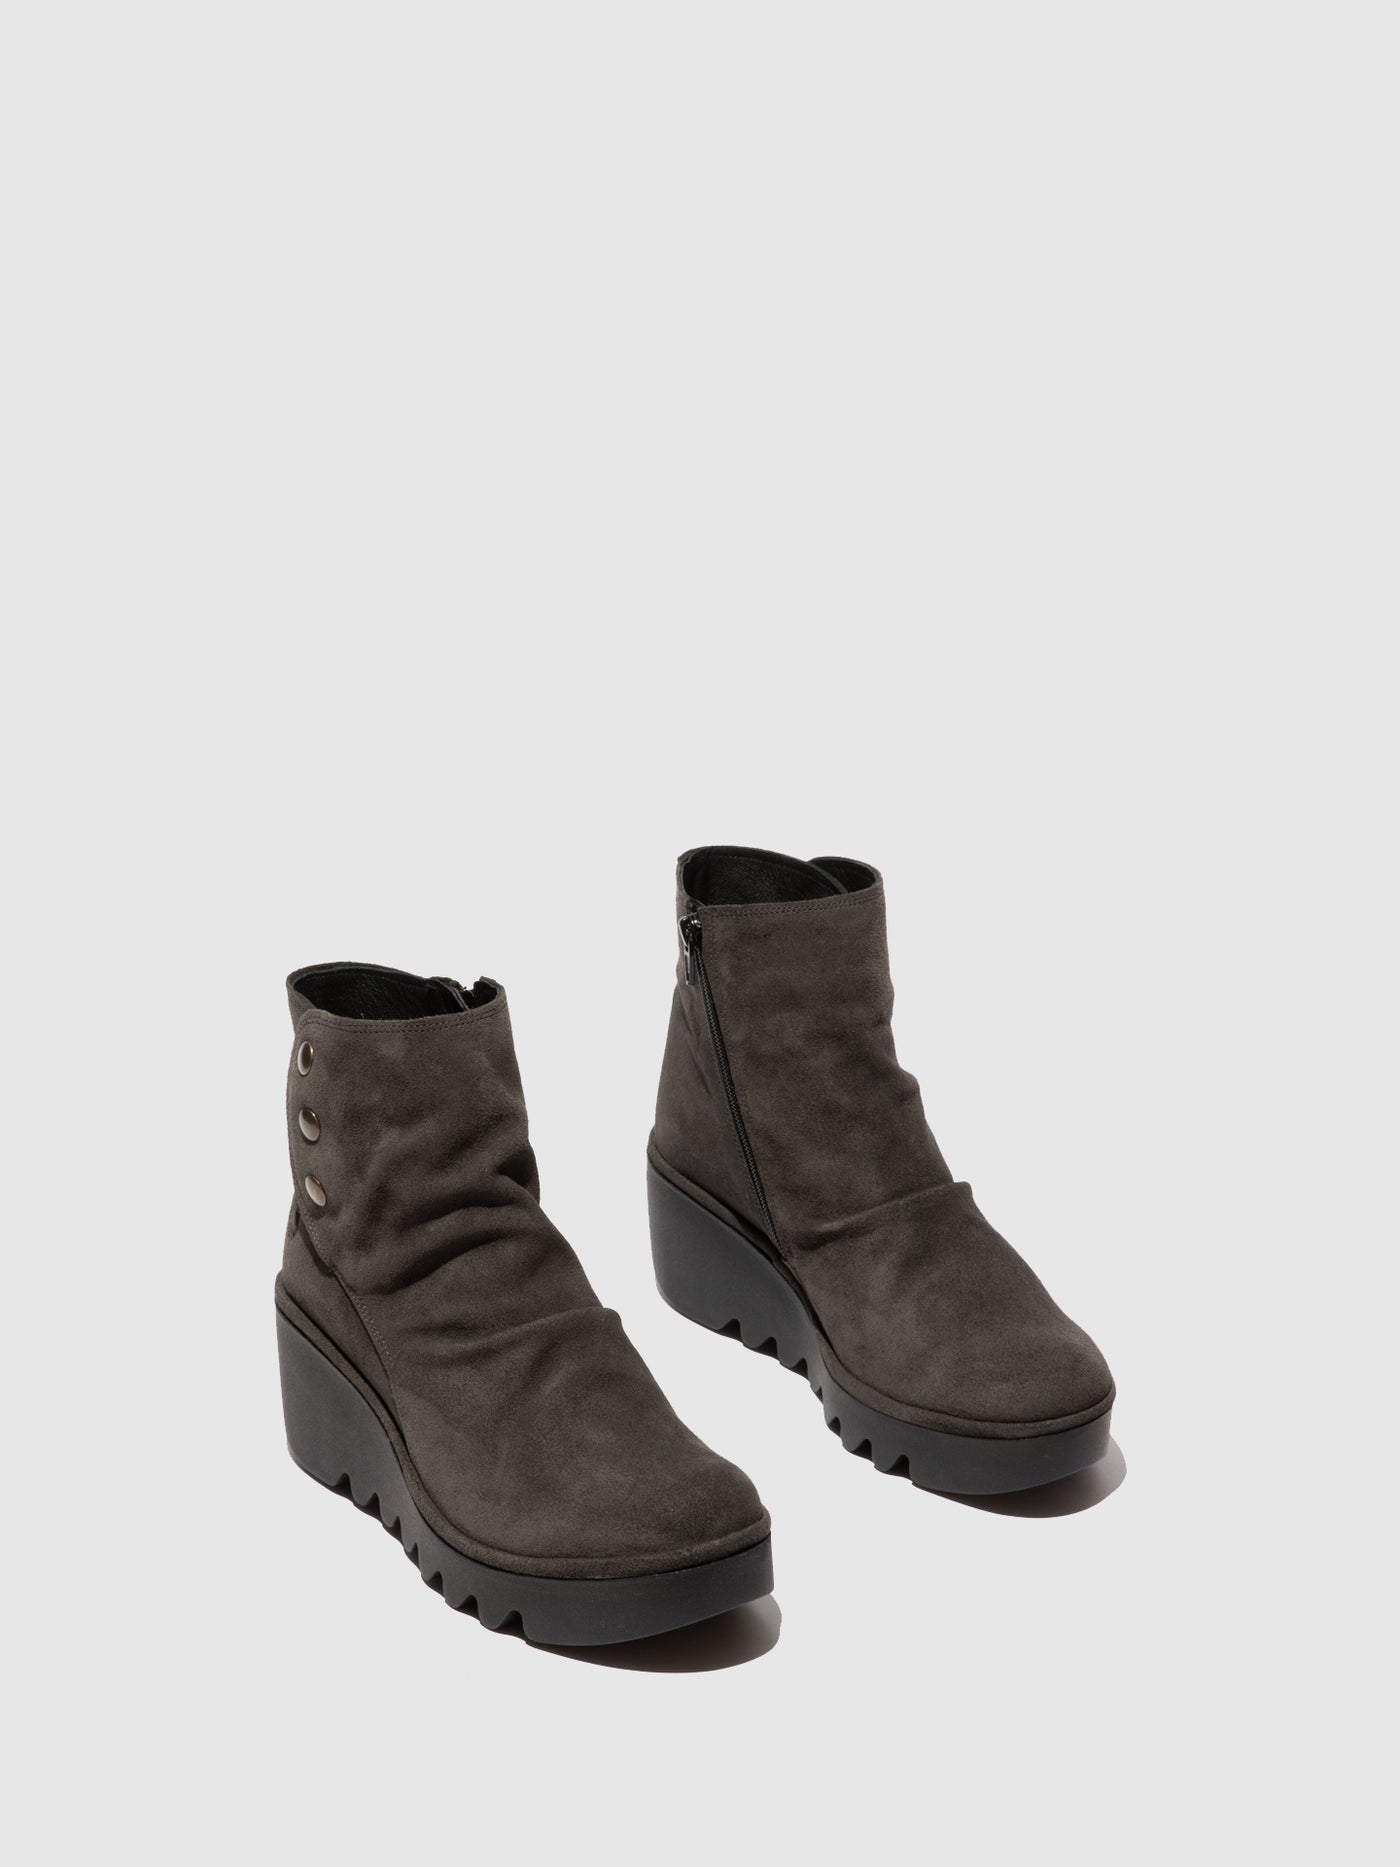 Zip Up Ankle Boots BROM344FLY OILSUEDE DIESEL